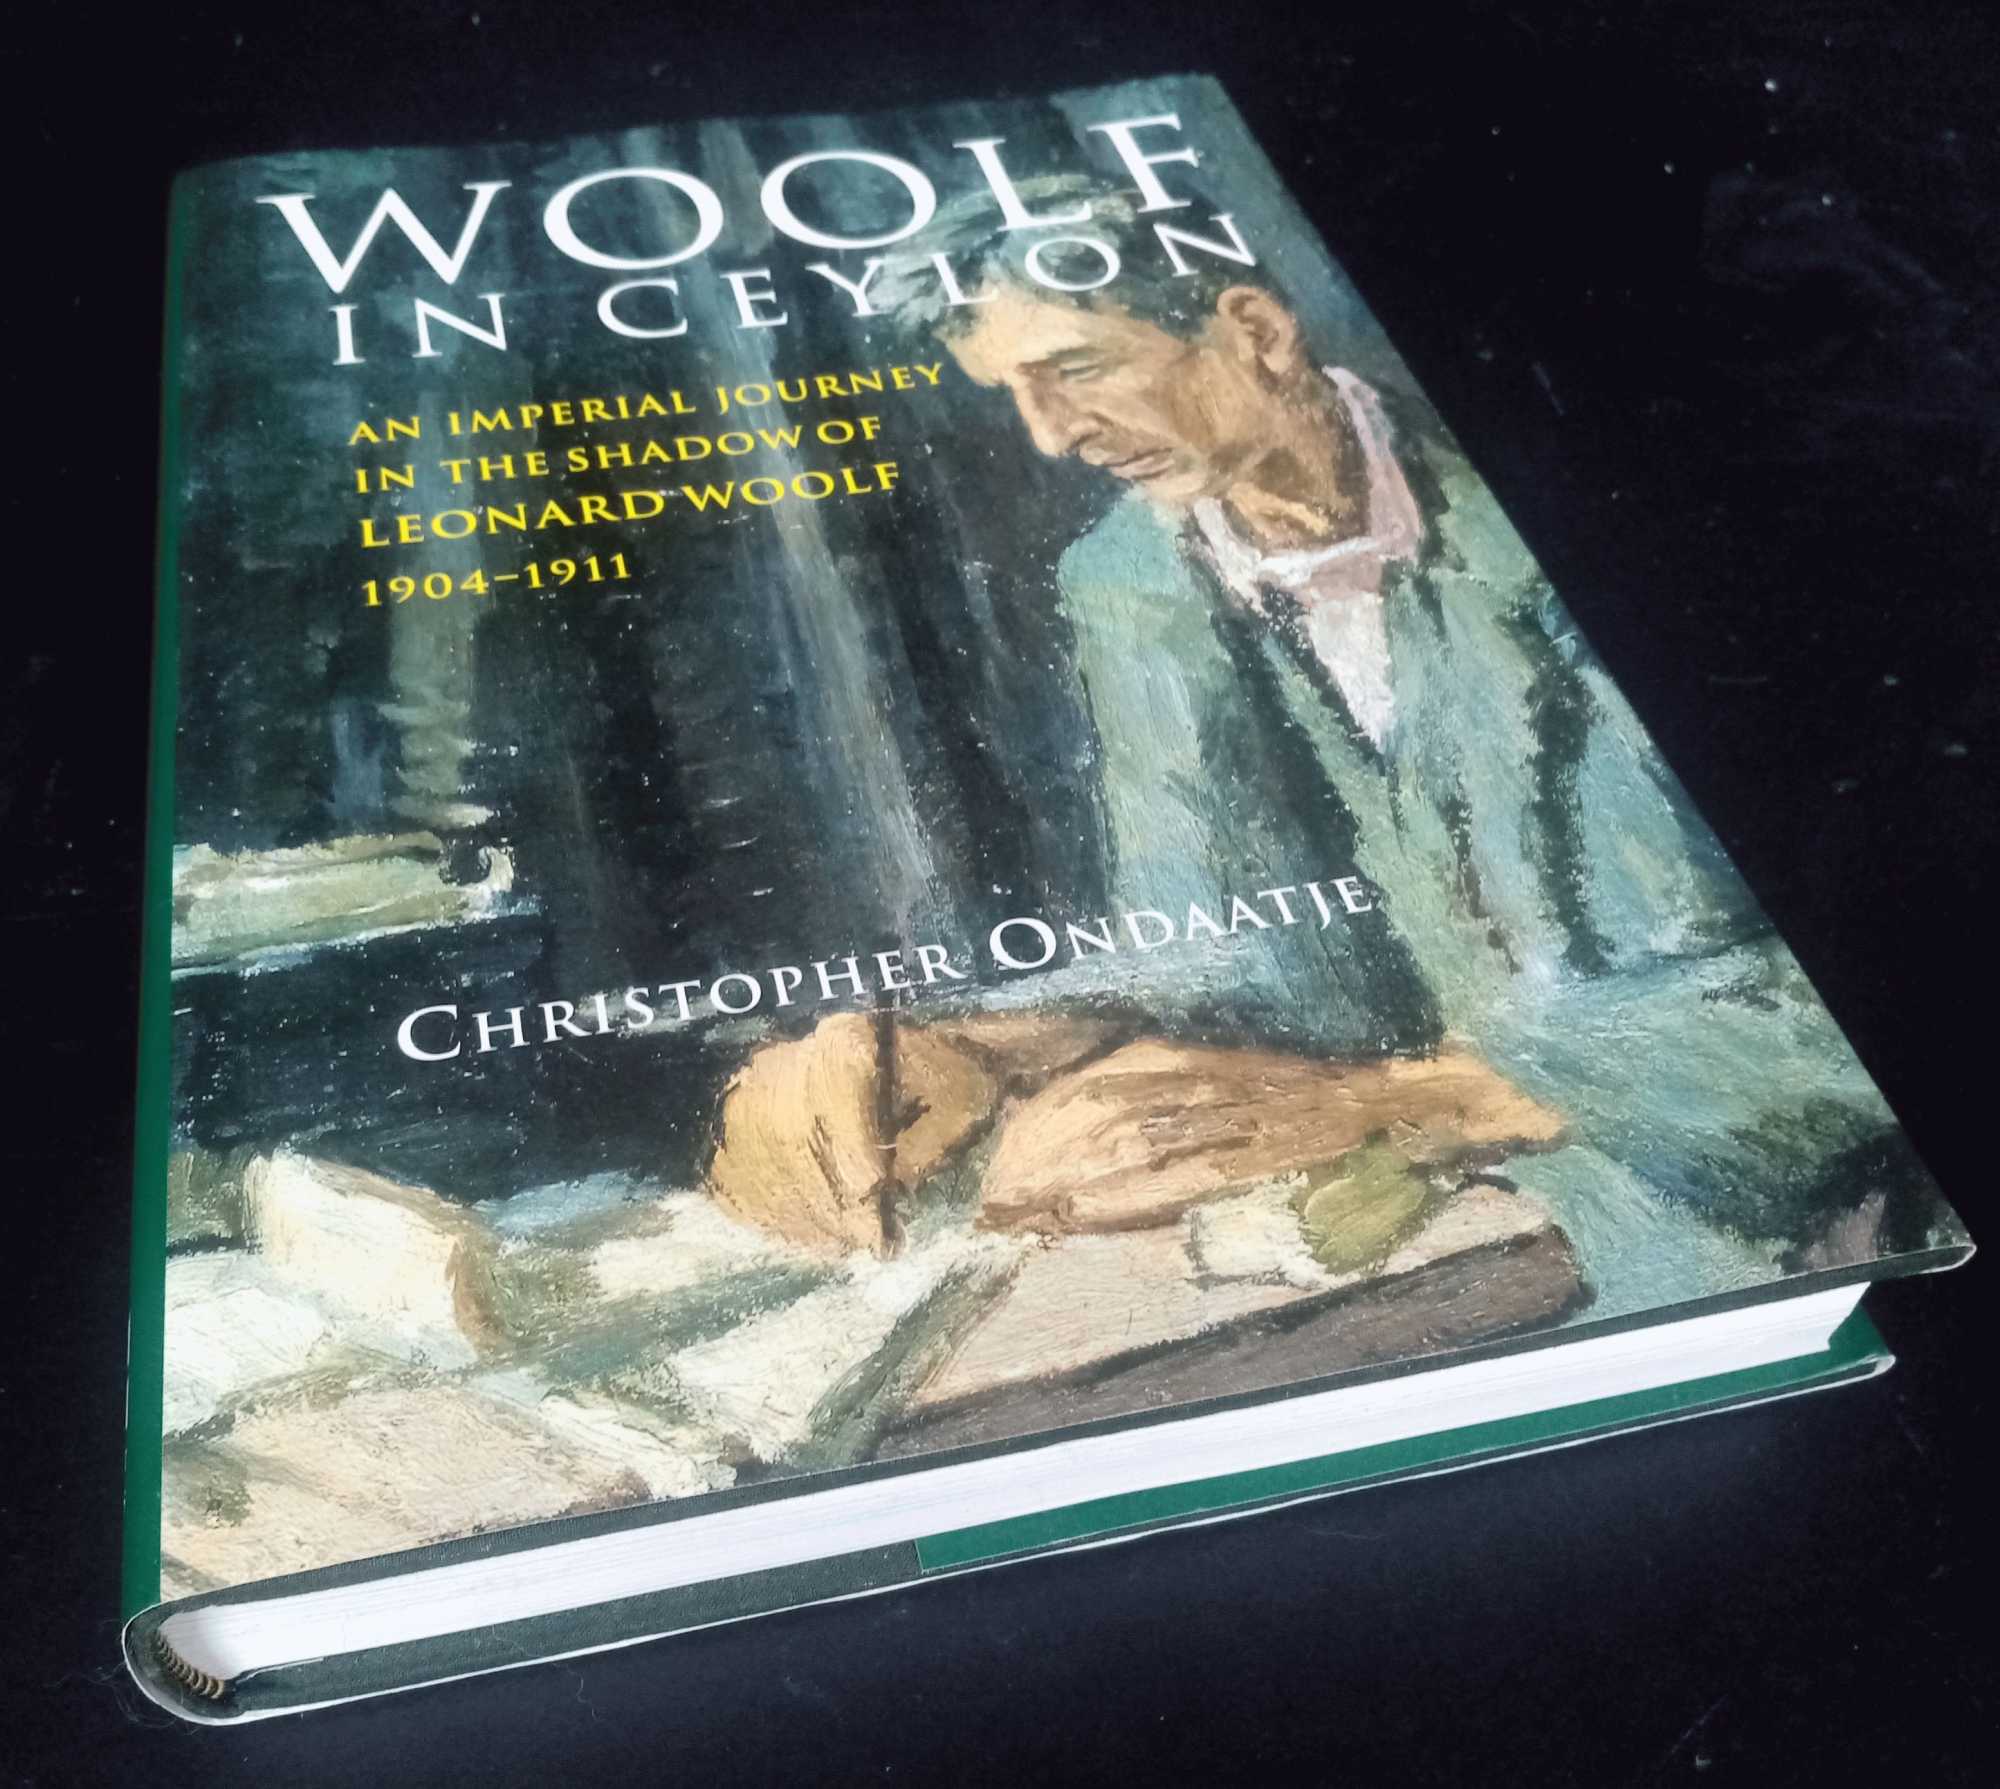 Christopher Ondaatje - Woolf in Ceylon: An Imperial Journey in the Shadow of Leonard Woolf 1904-1911